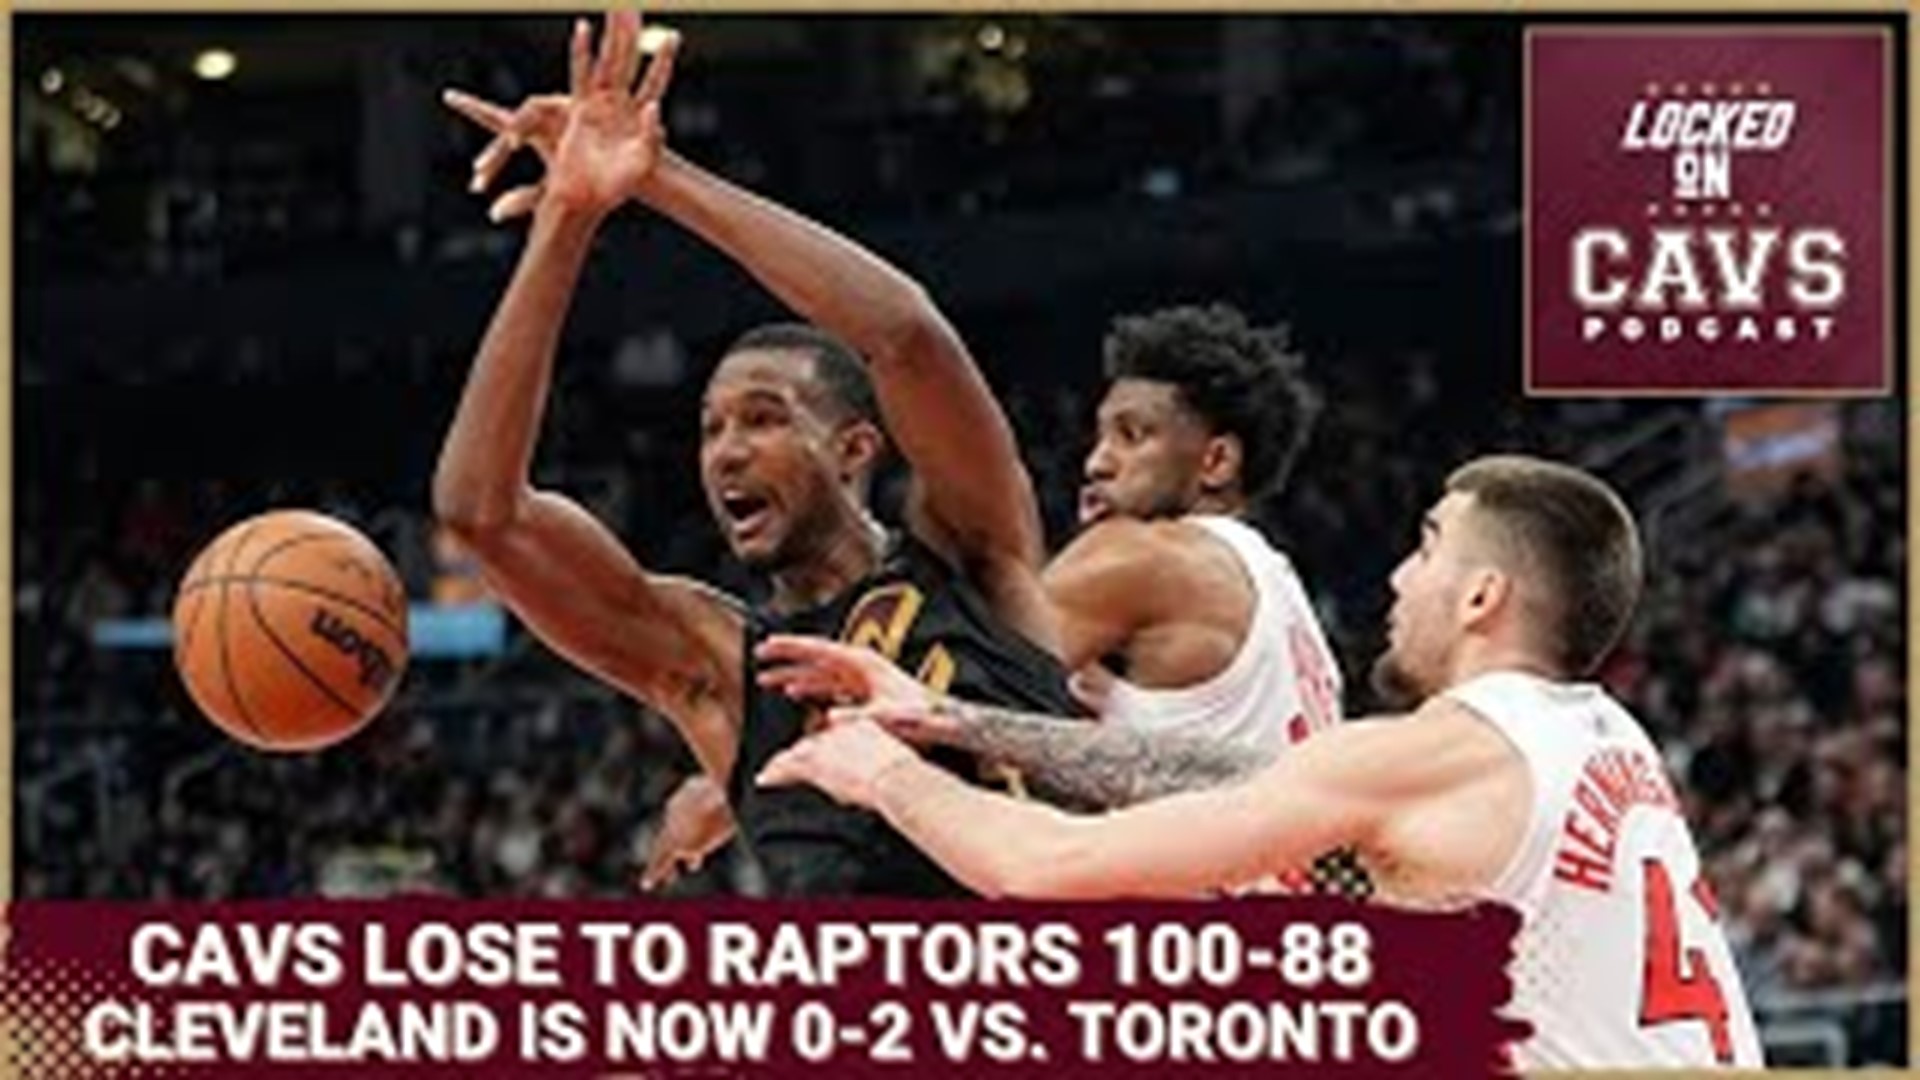 The Cavs lost to the Toronto Raptors.